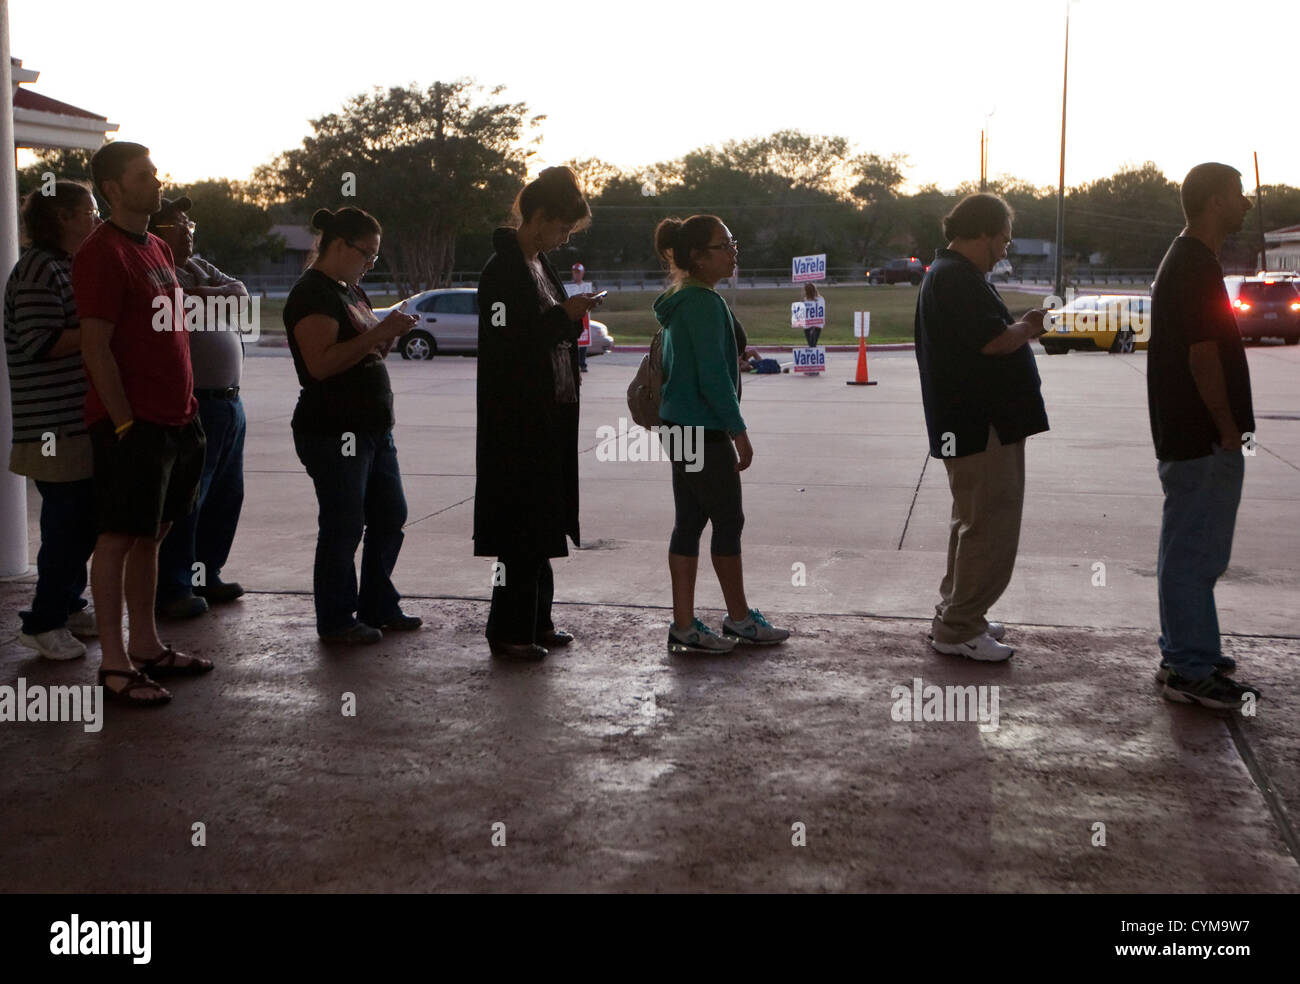 November 6th, 2012 Austin, Texas: Voters stand in line and review ballot waiting to cast their vote in Travis County Texas. Stock Photo